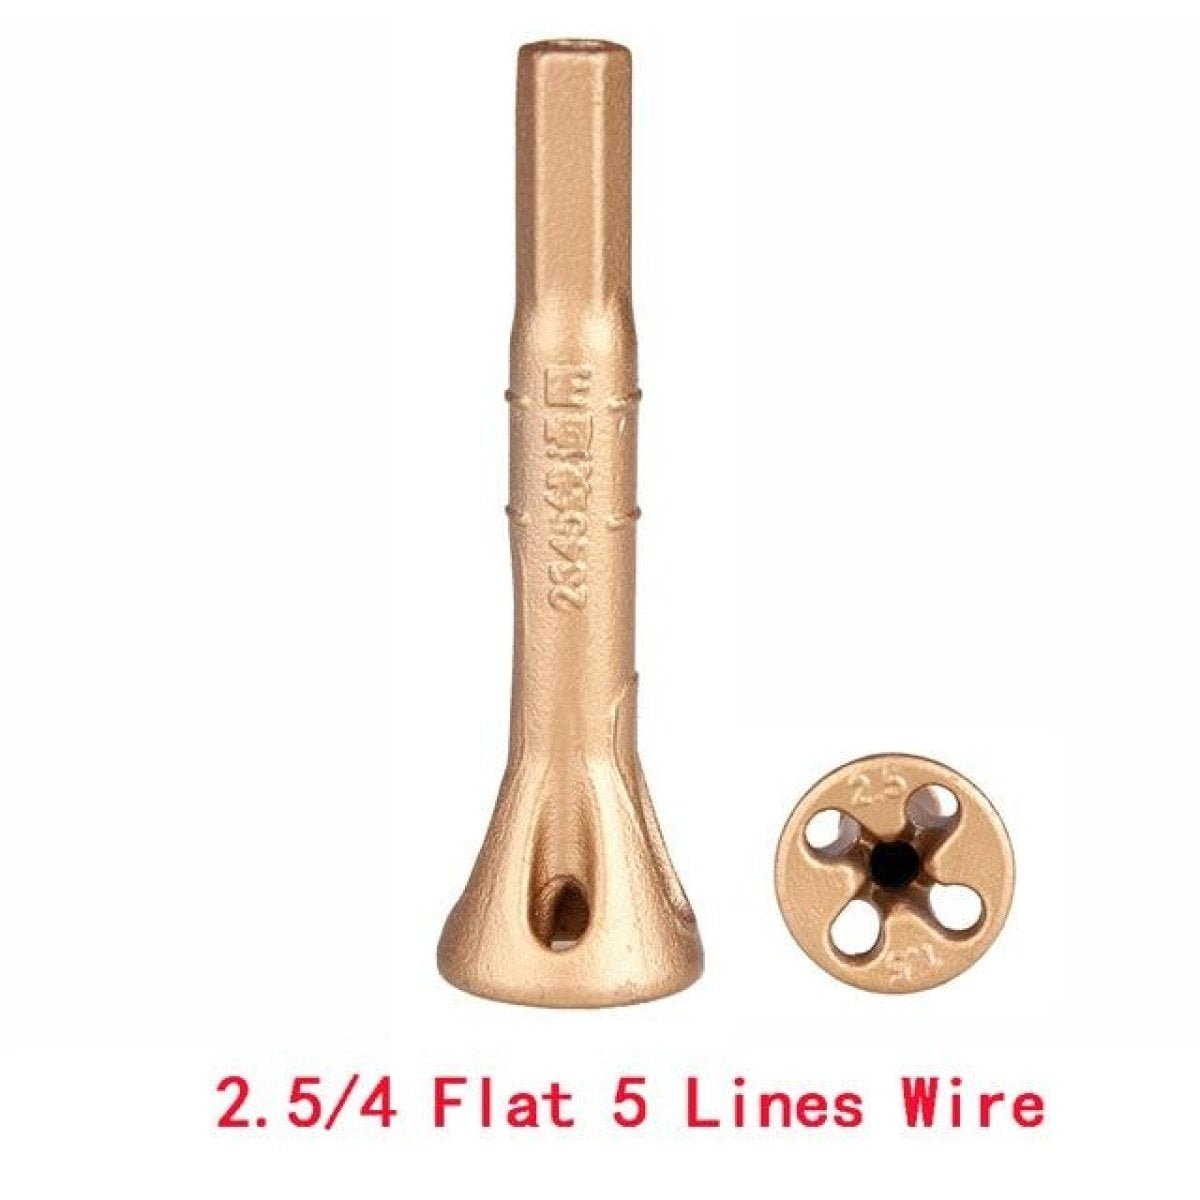 Electrical Cable Wire Twist Tool Hole Universal Automatic Connector - 2.5-4 Manganese - Asia Sell